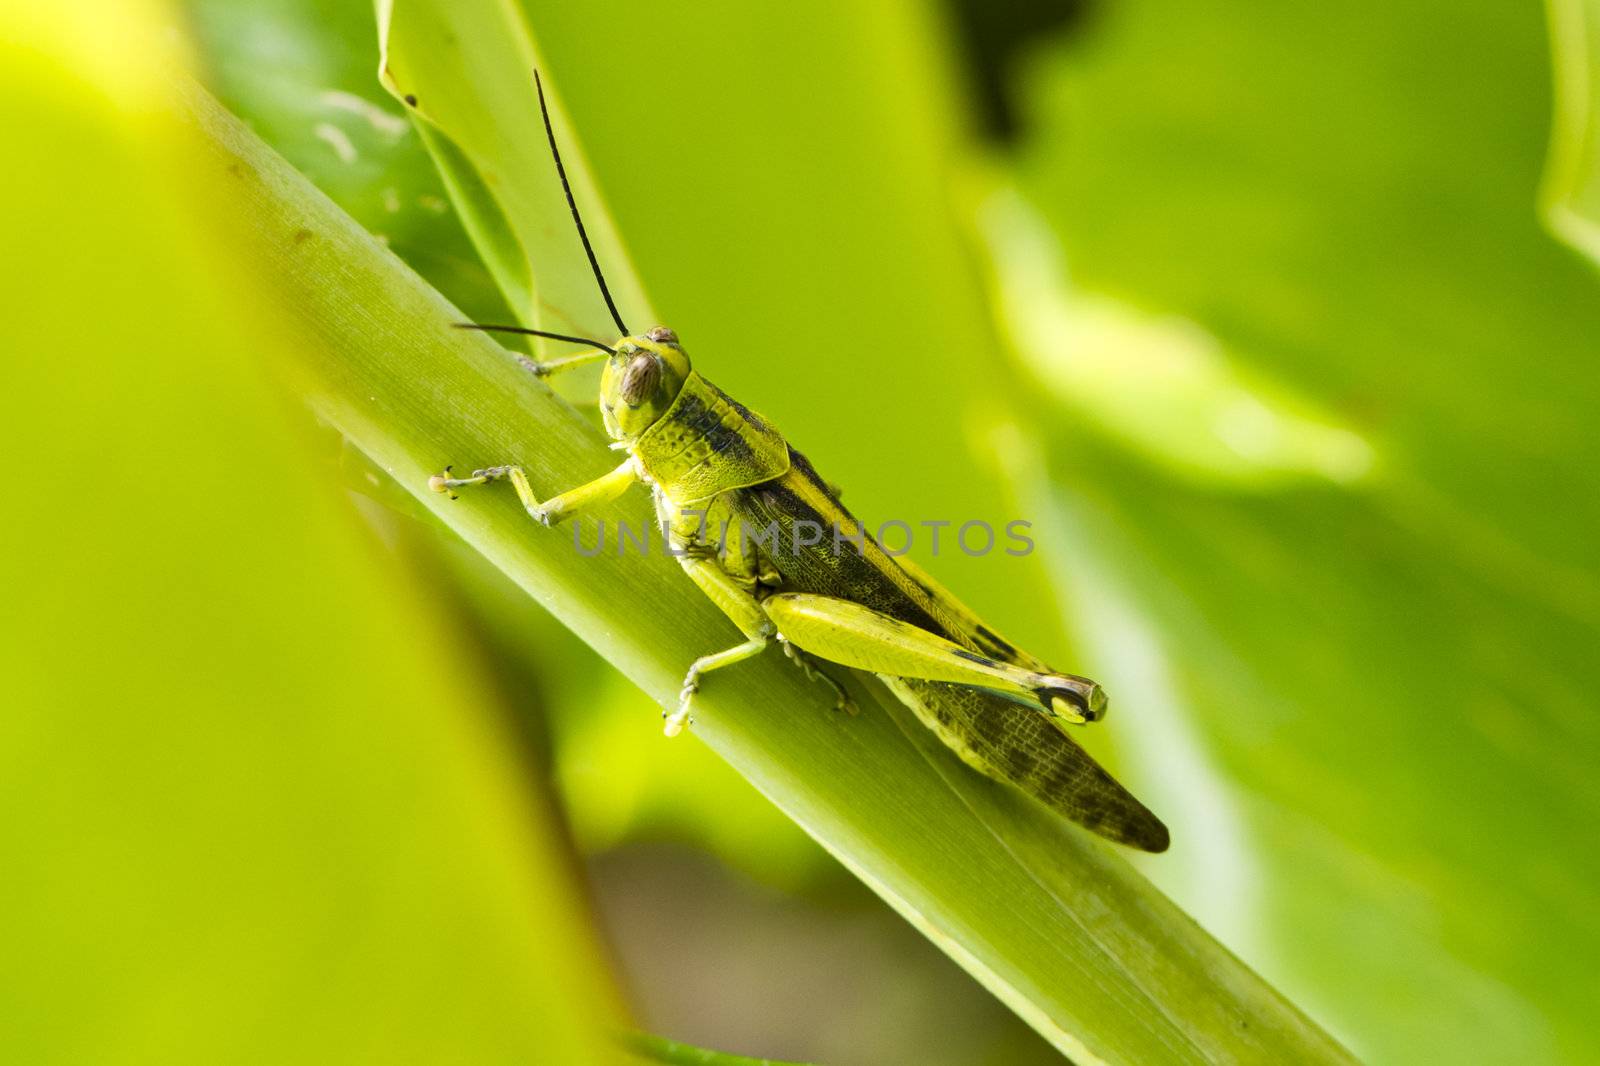 Grasshopper on a ginger leave ready to jump away